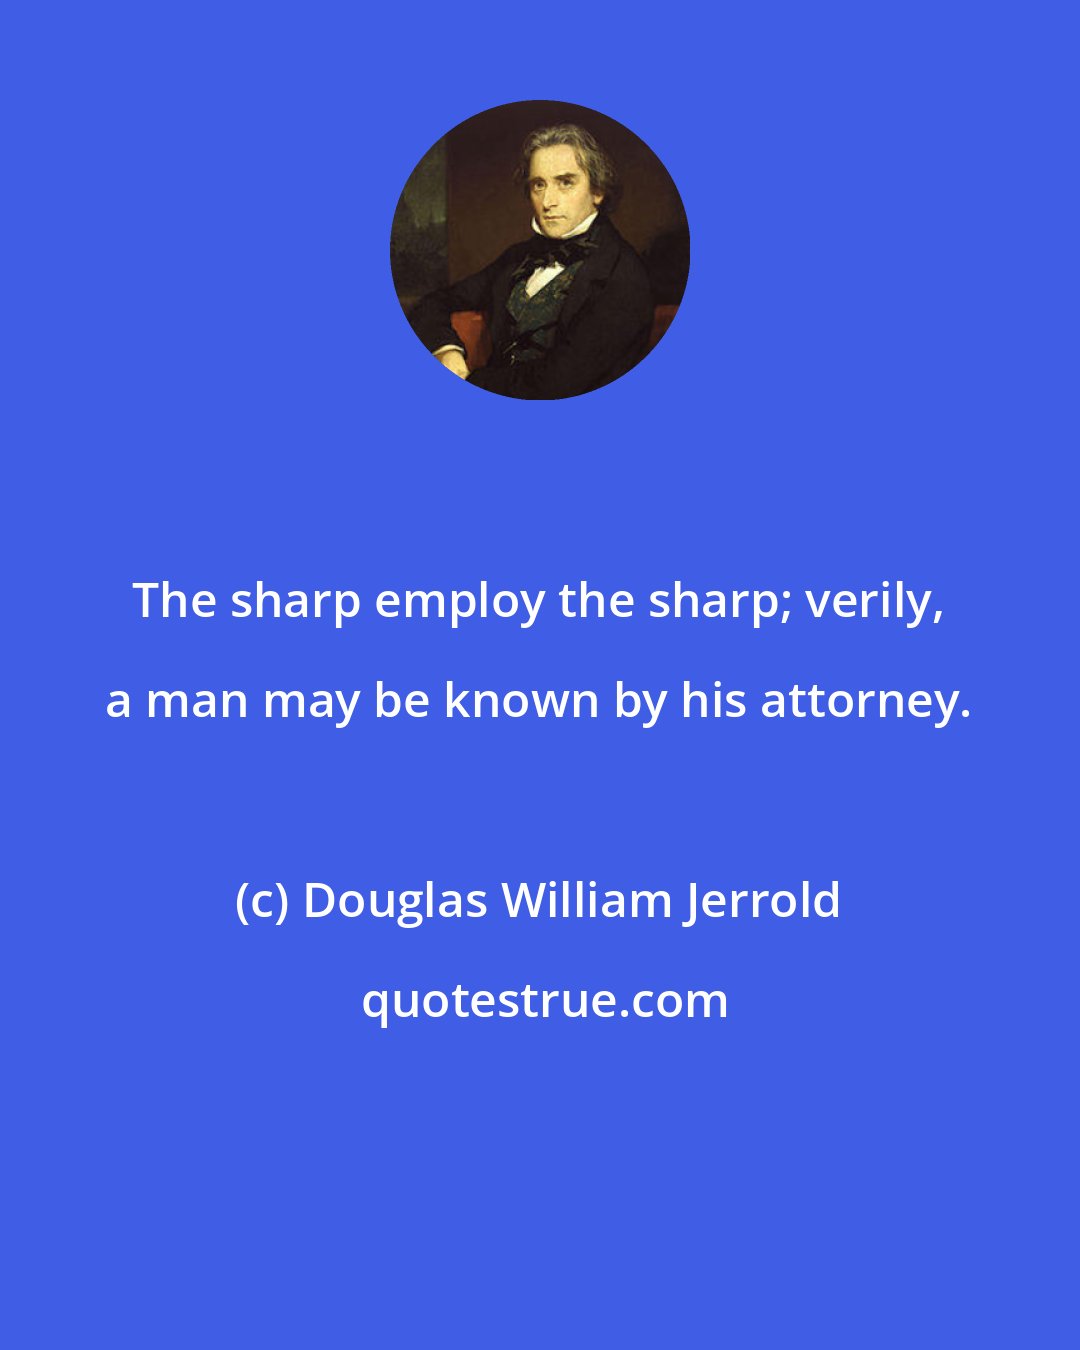 Douglas William Jerrold: The sharp employ the sharp; verily, a man may be known by his attorney.